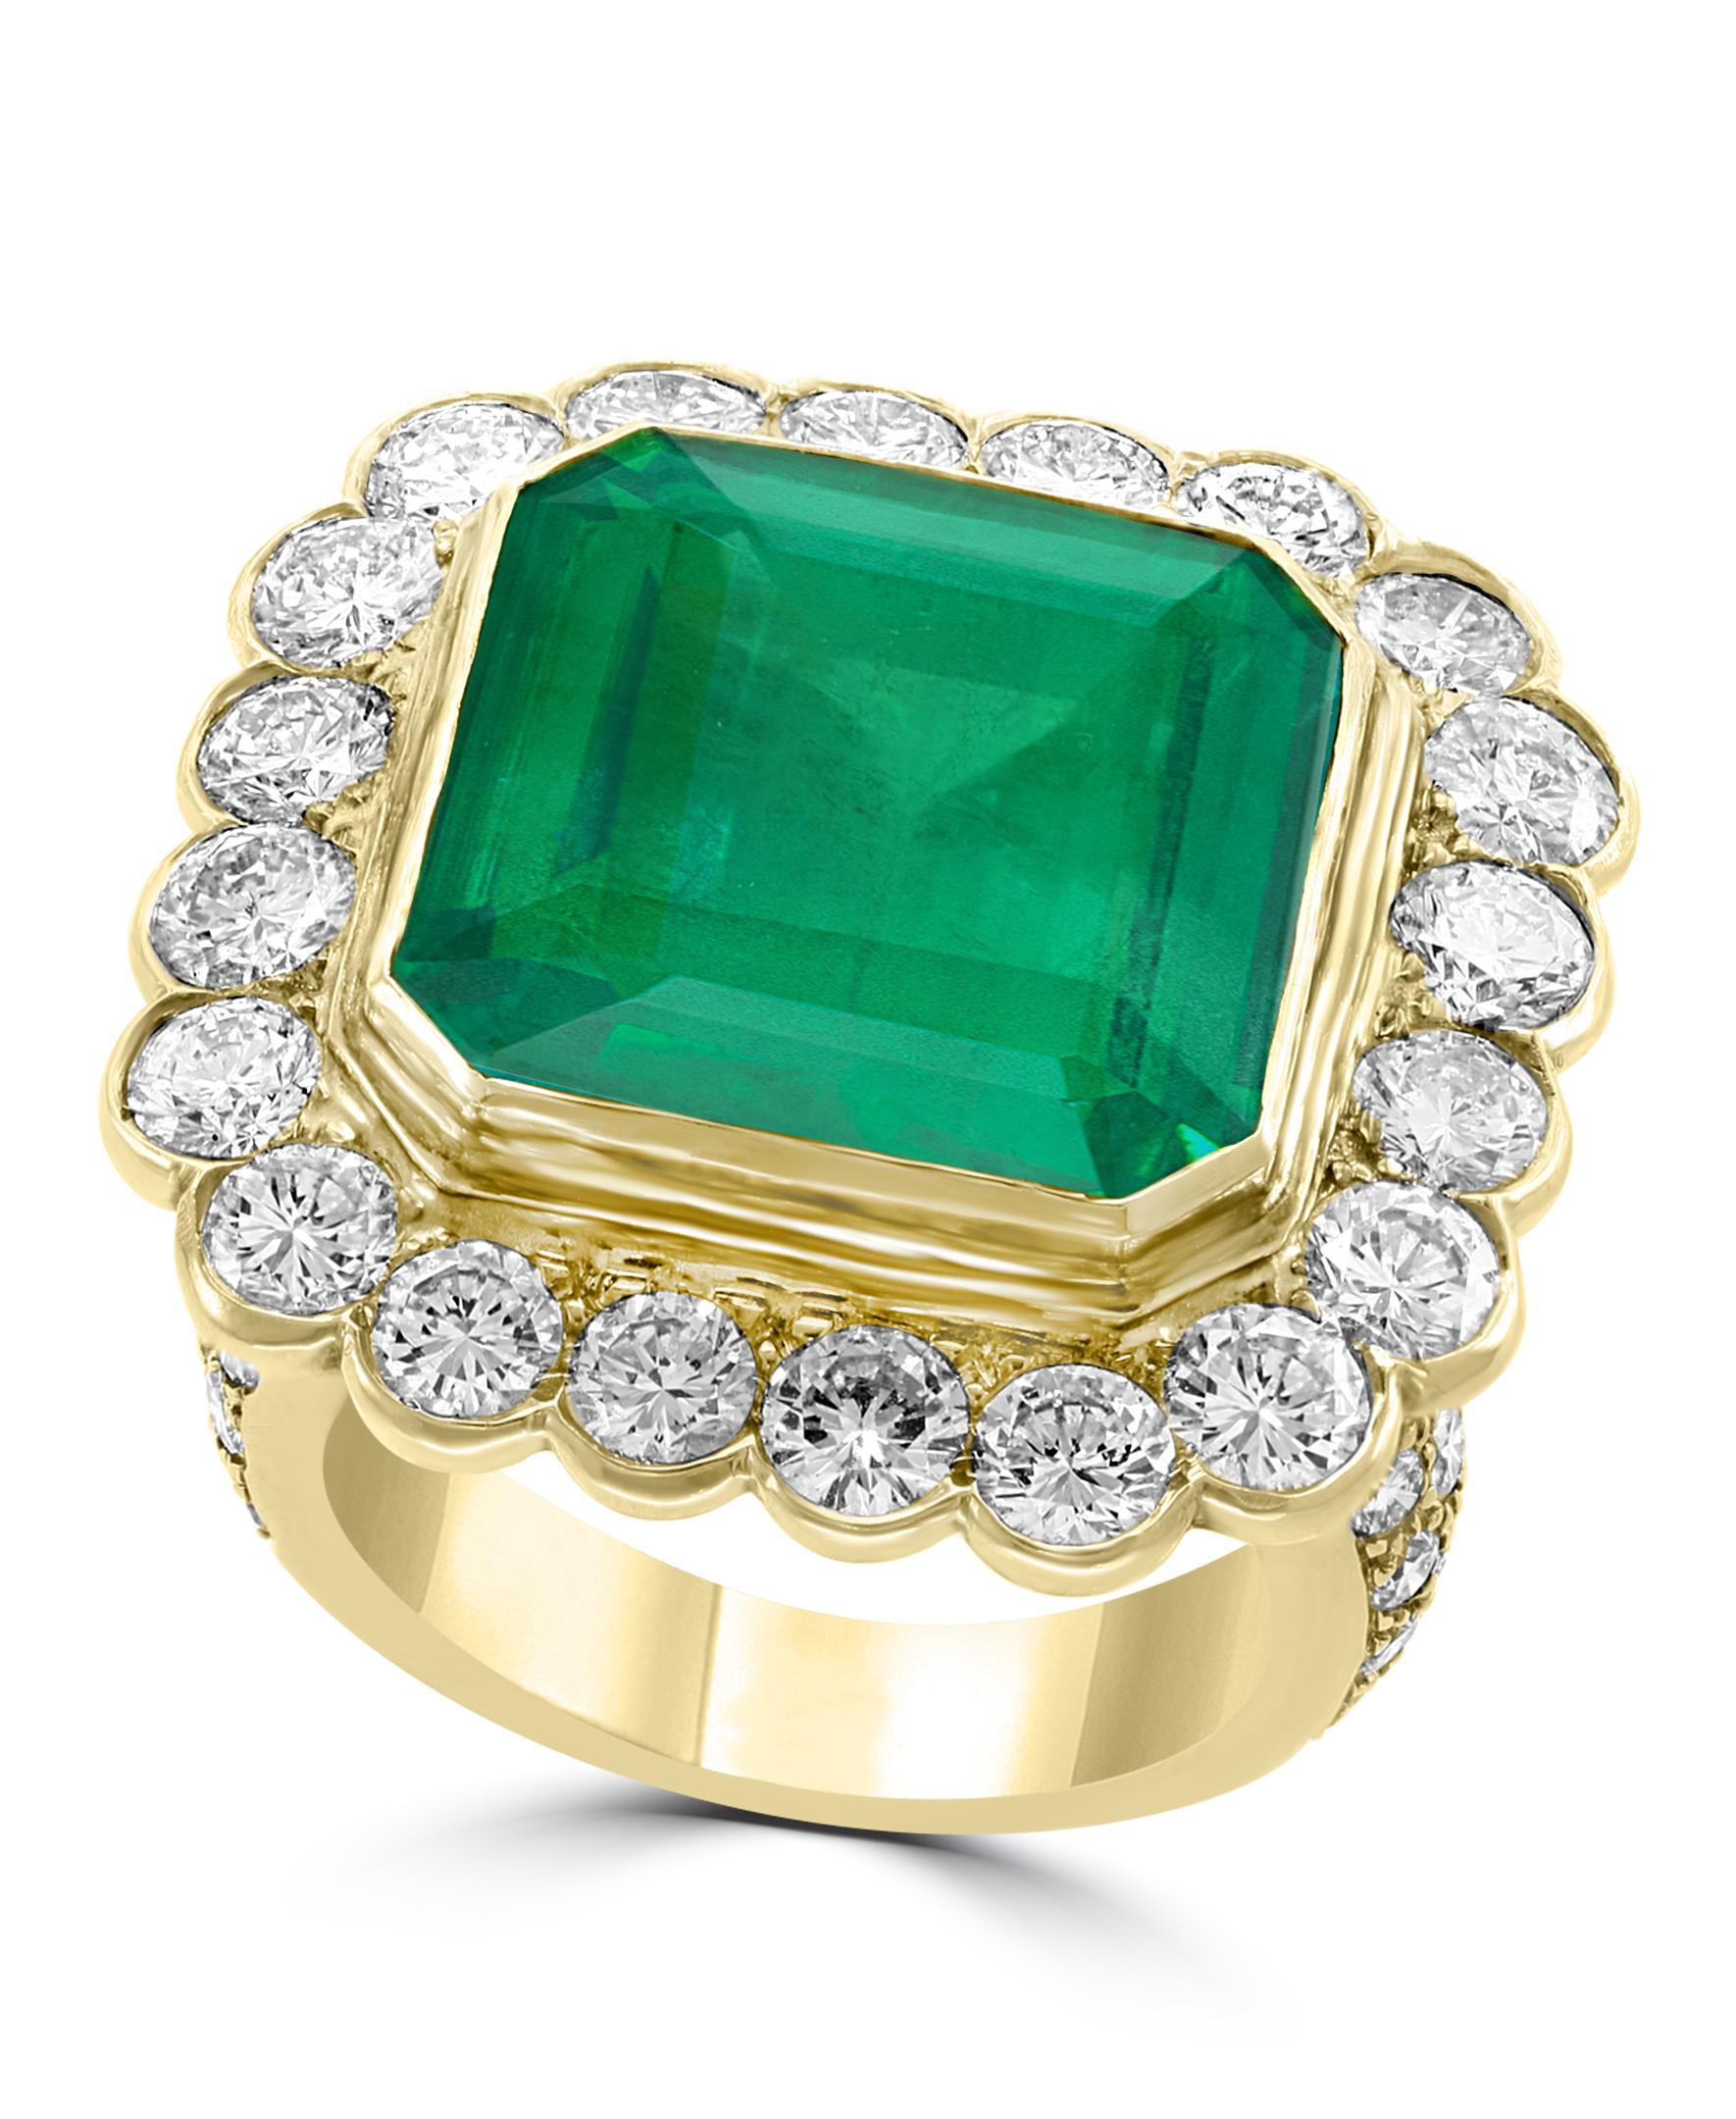 AGL Certified Minor Traditional 17.5 Ct Emerald Cut Colombian Emerald + Dia Ring 3